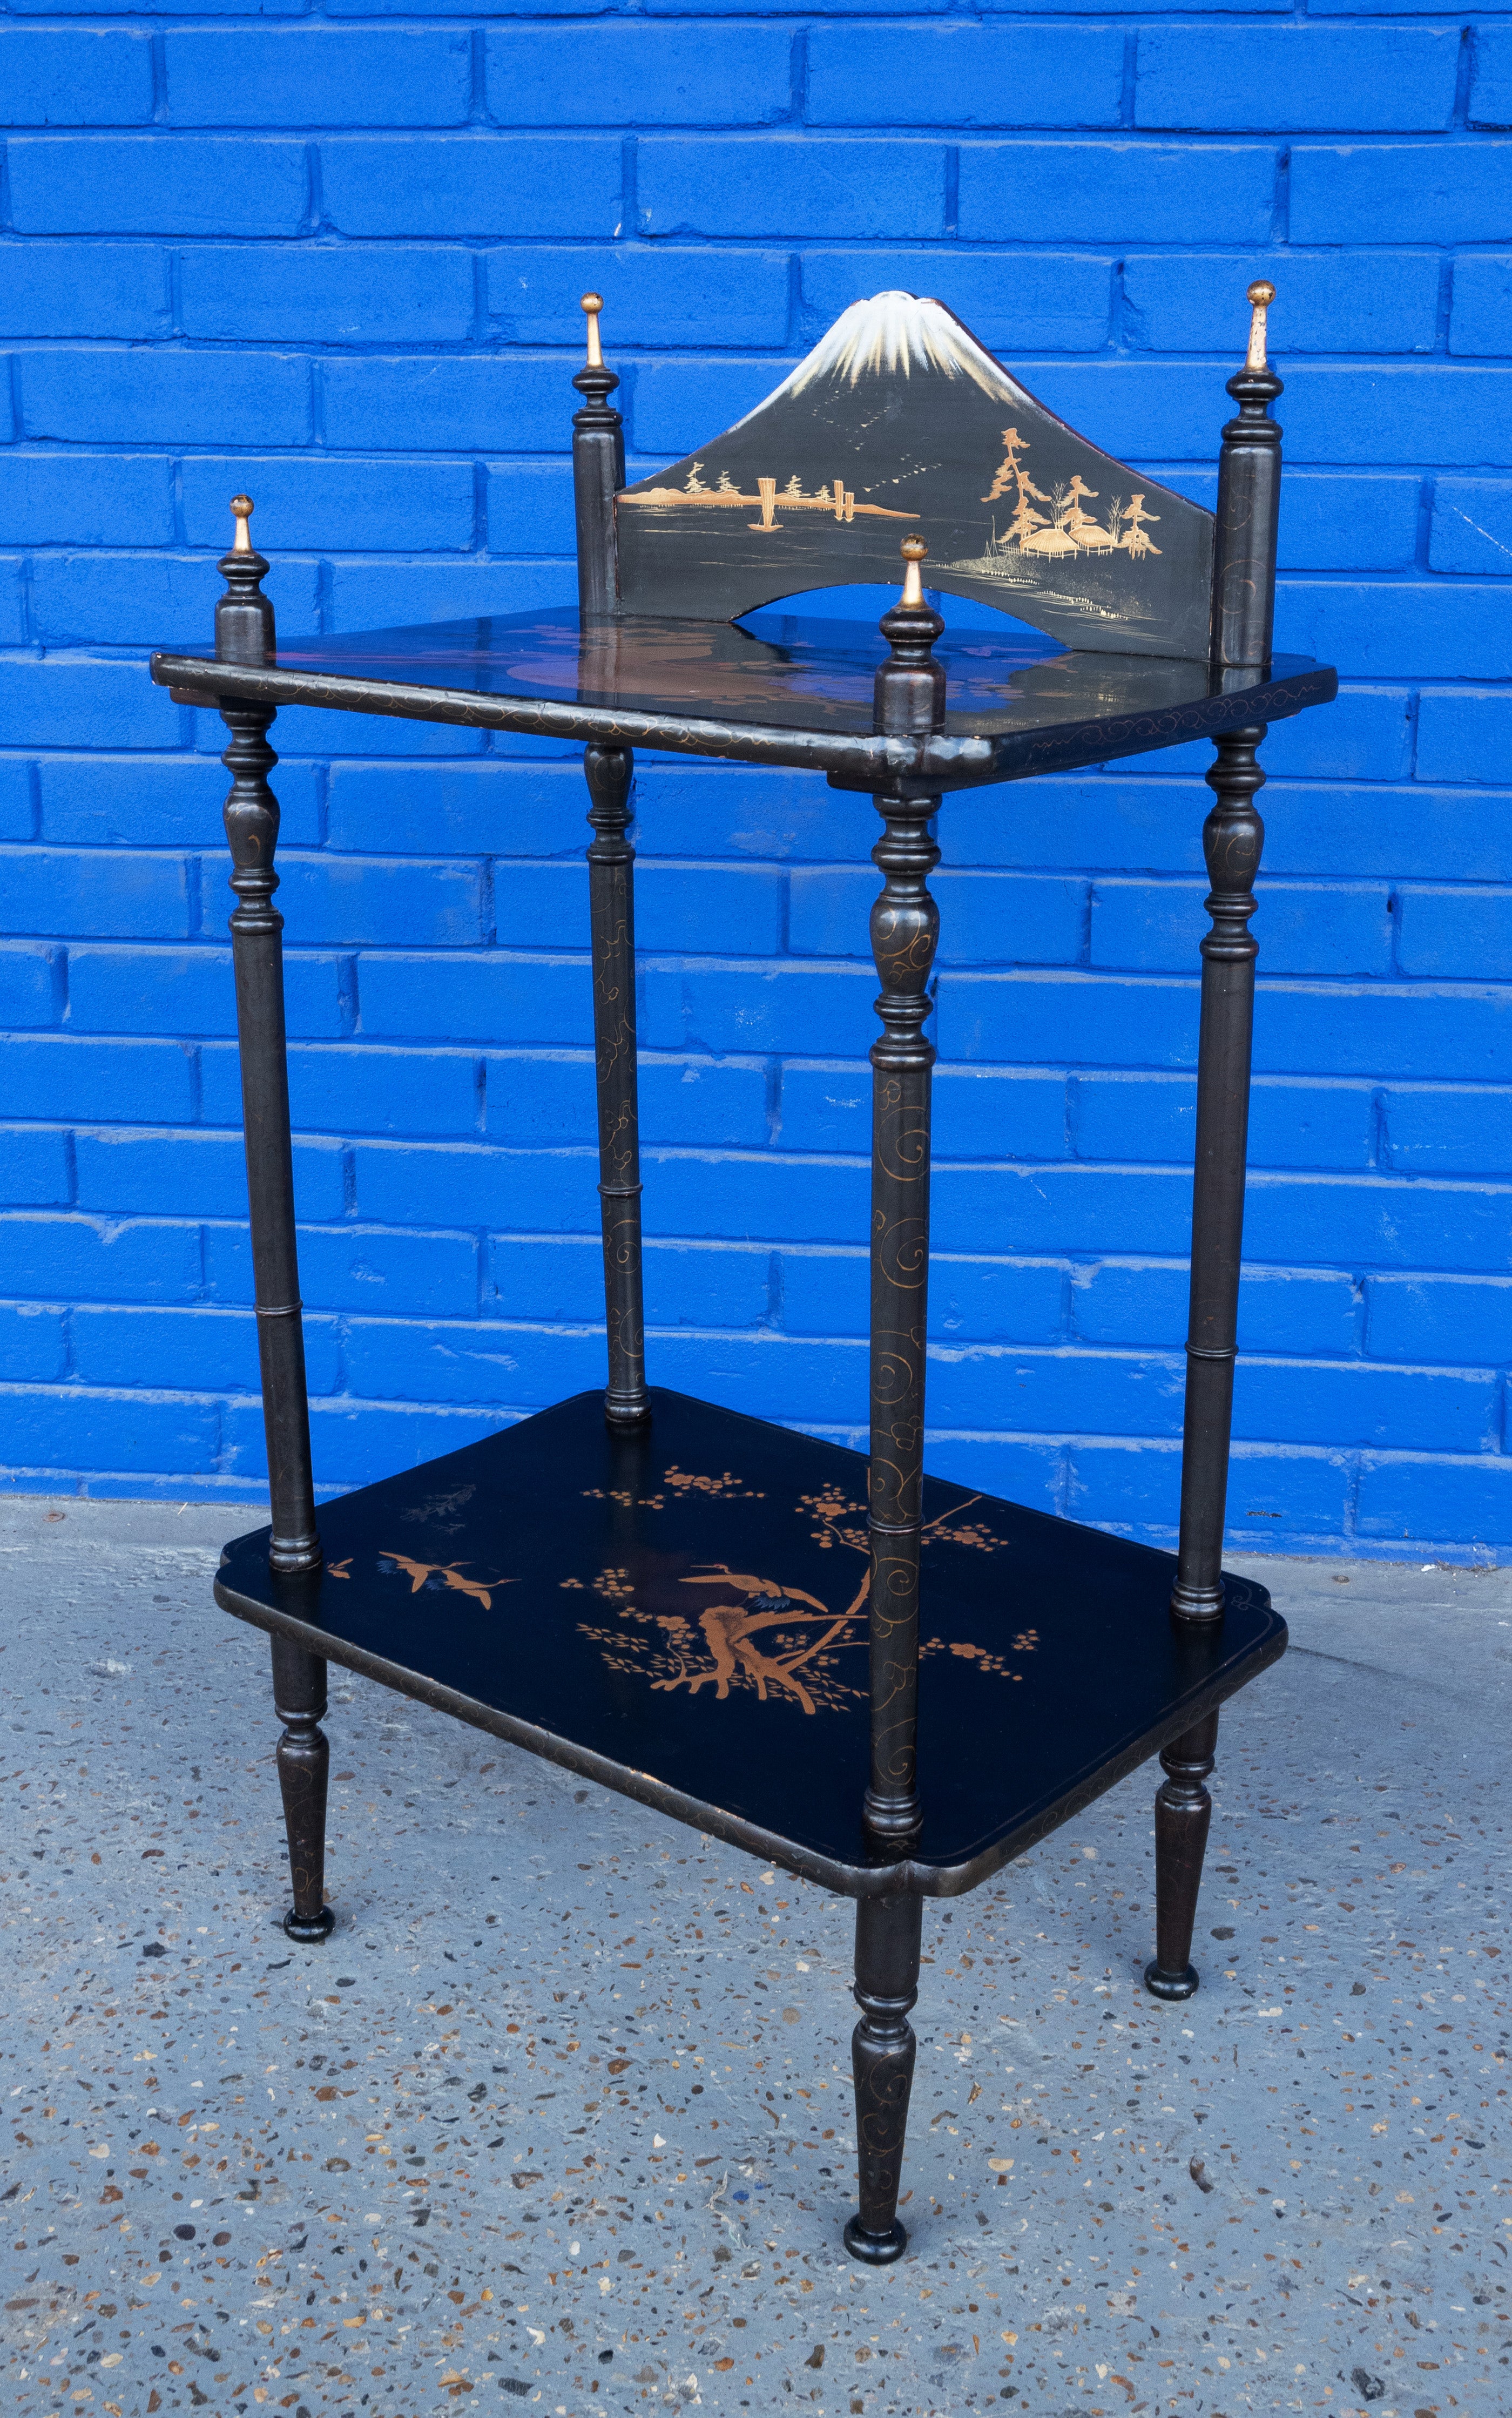 Antique 19th Century Lacquered Etagere Perret And Vibert, France
C.1890
In very good condition commensurate of age.